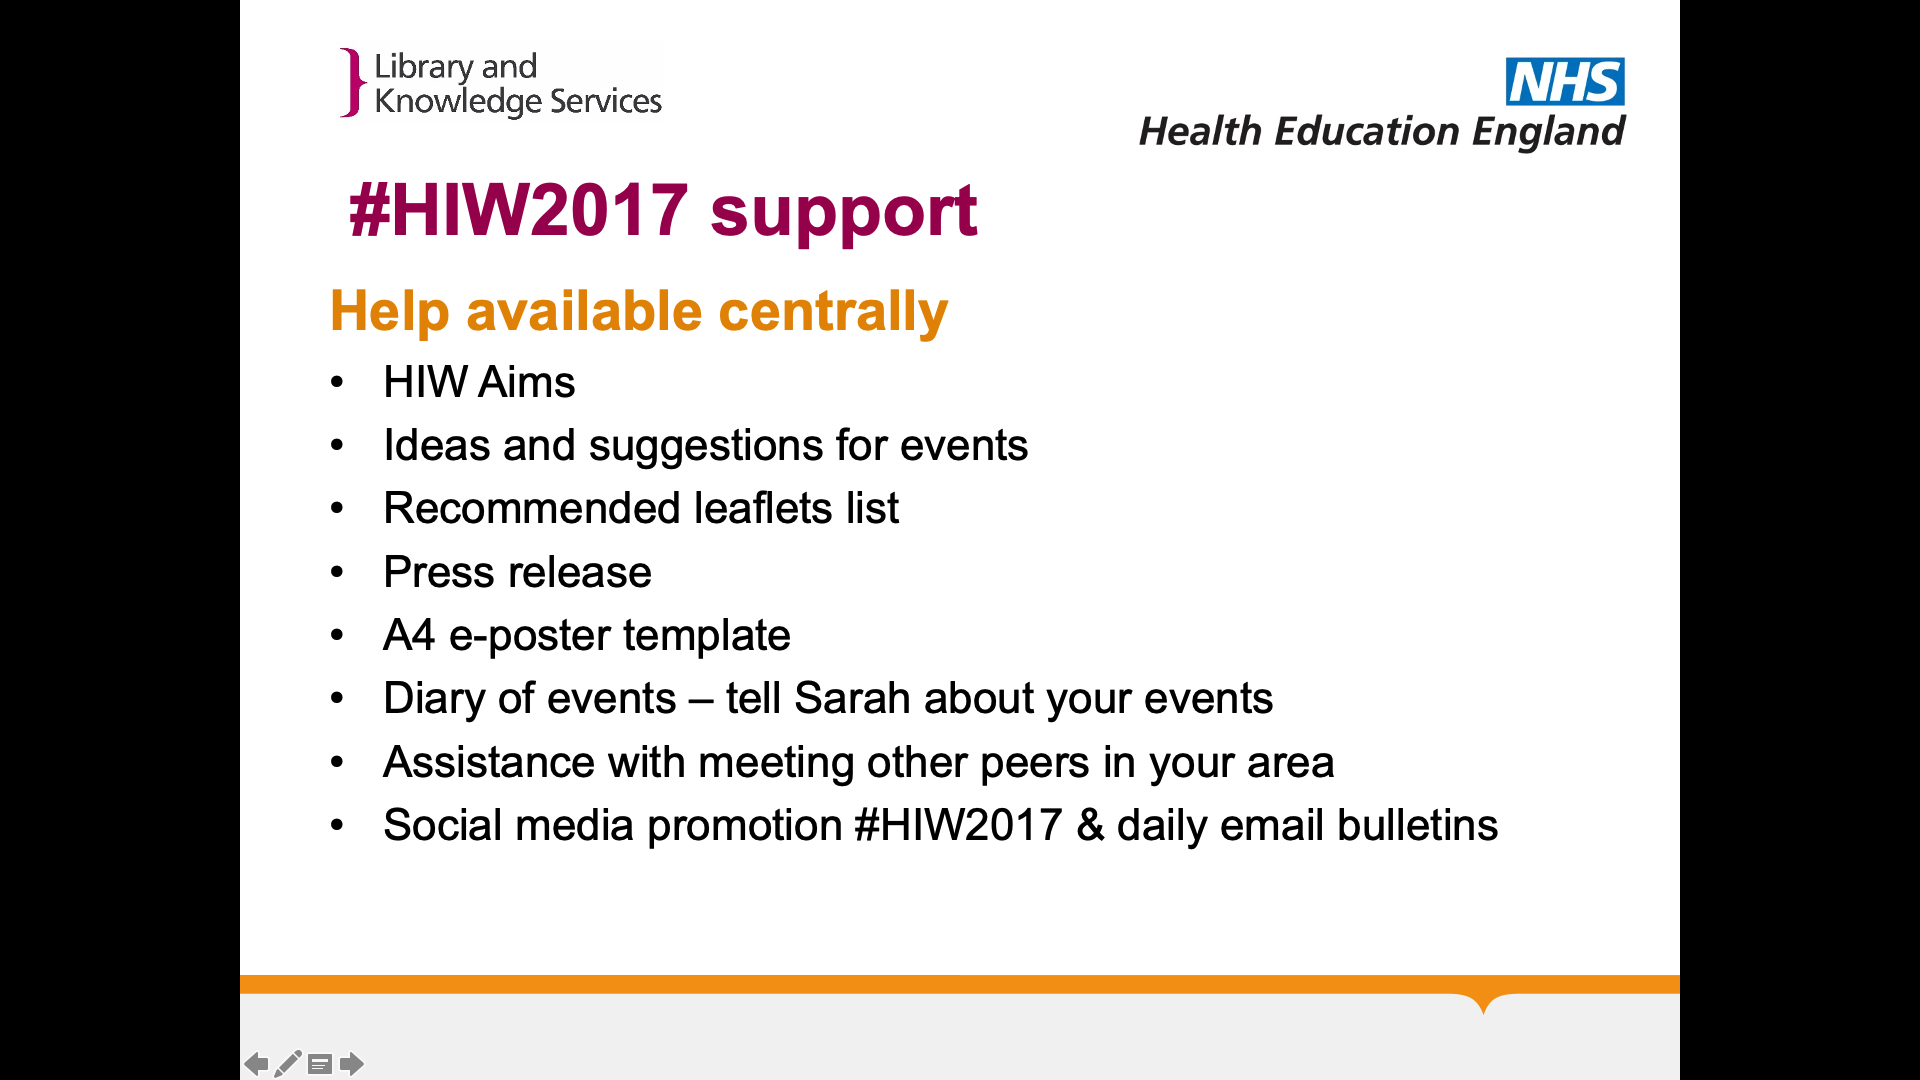 Title: #HIW2017 support. List under heading 